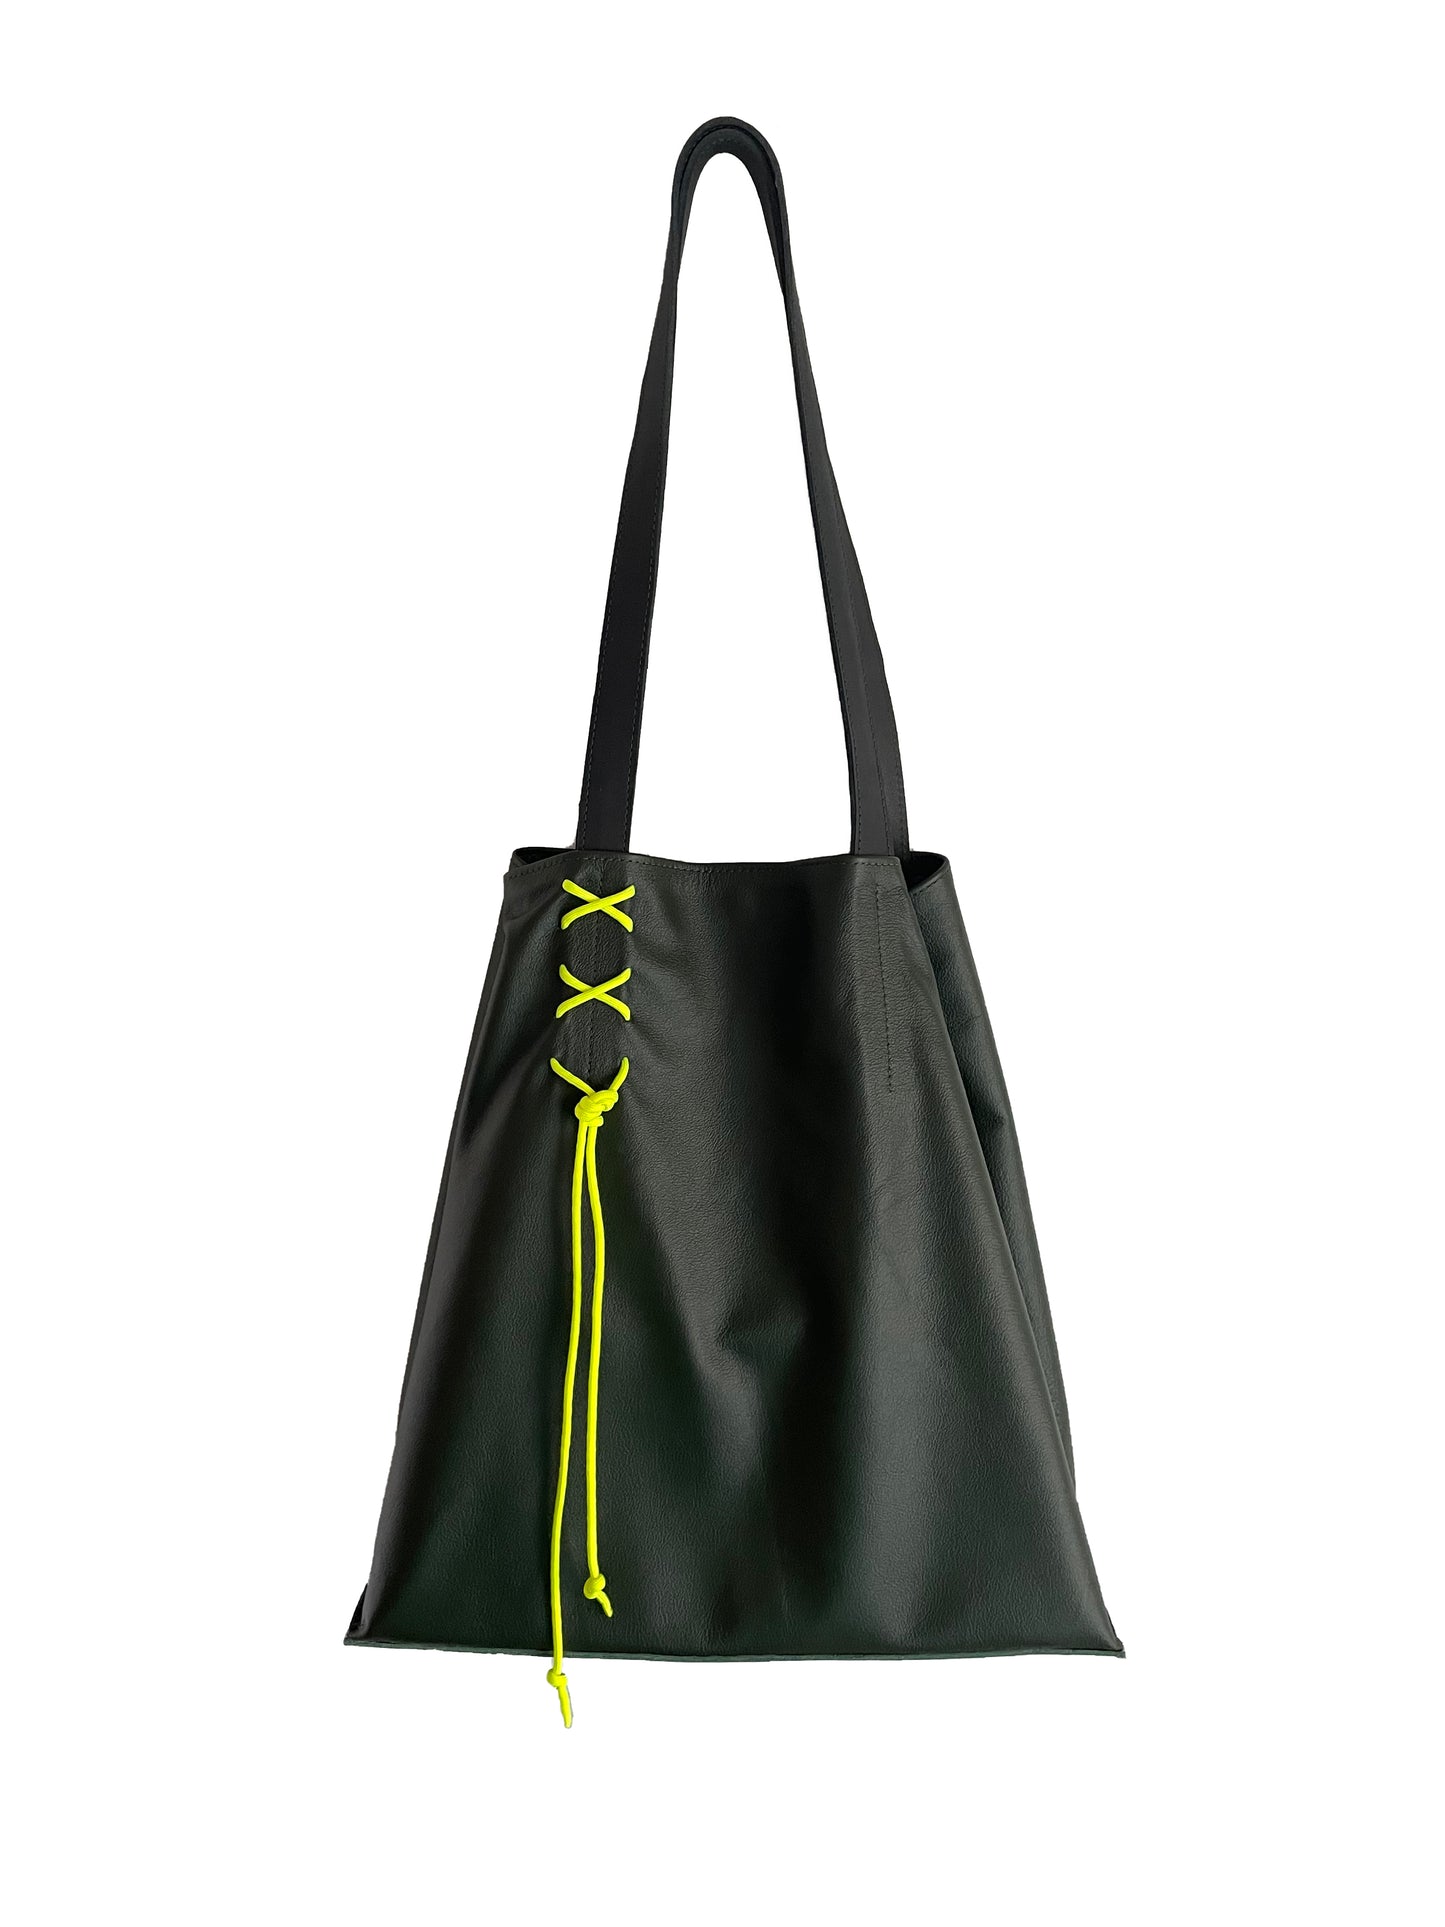 upcycled leather shopper dark green yellow neon olive leather